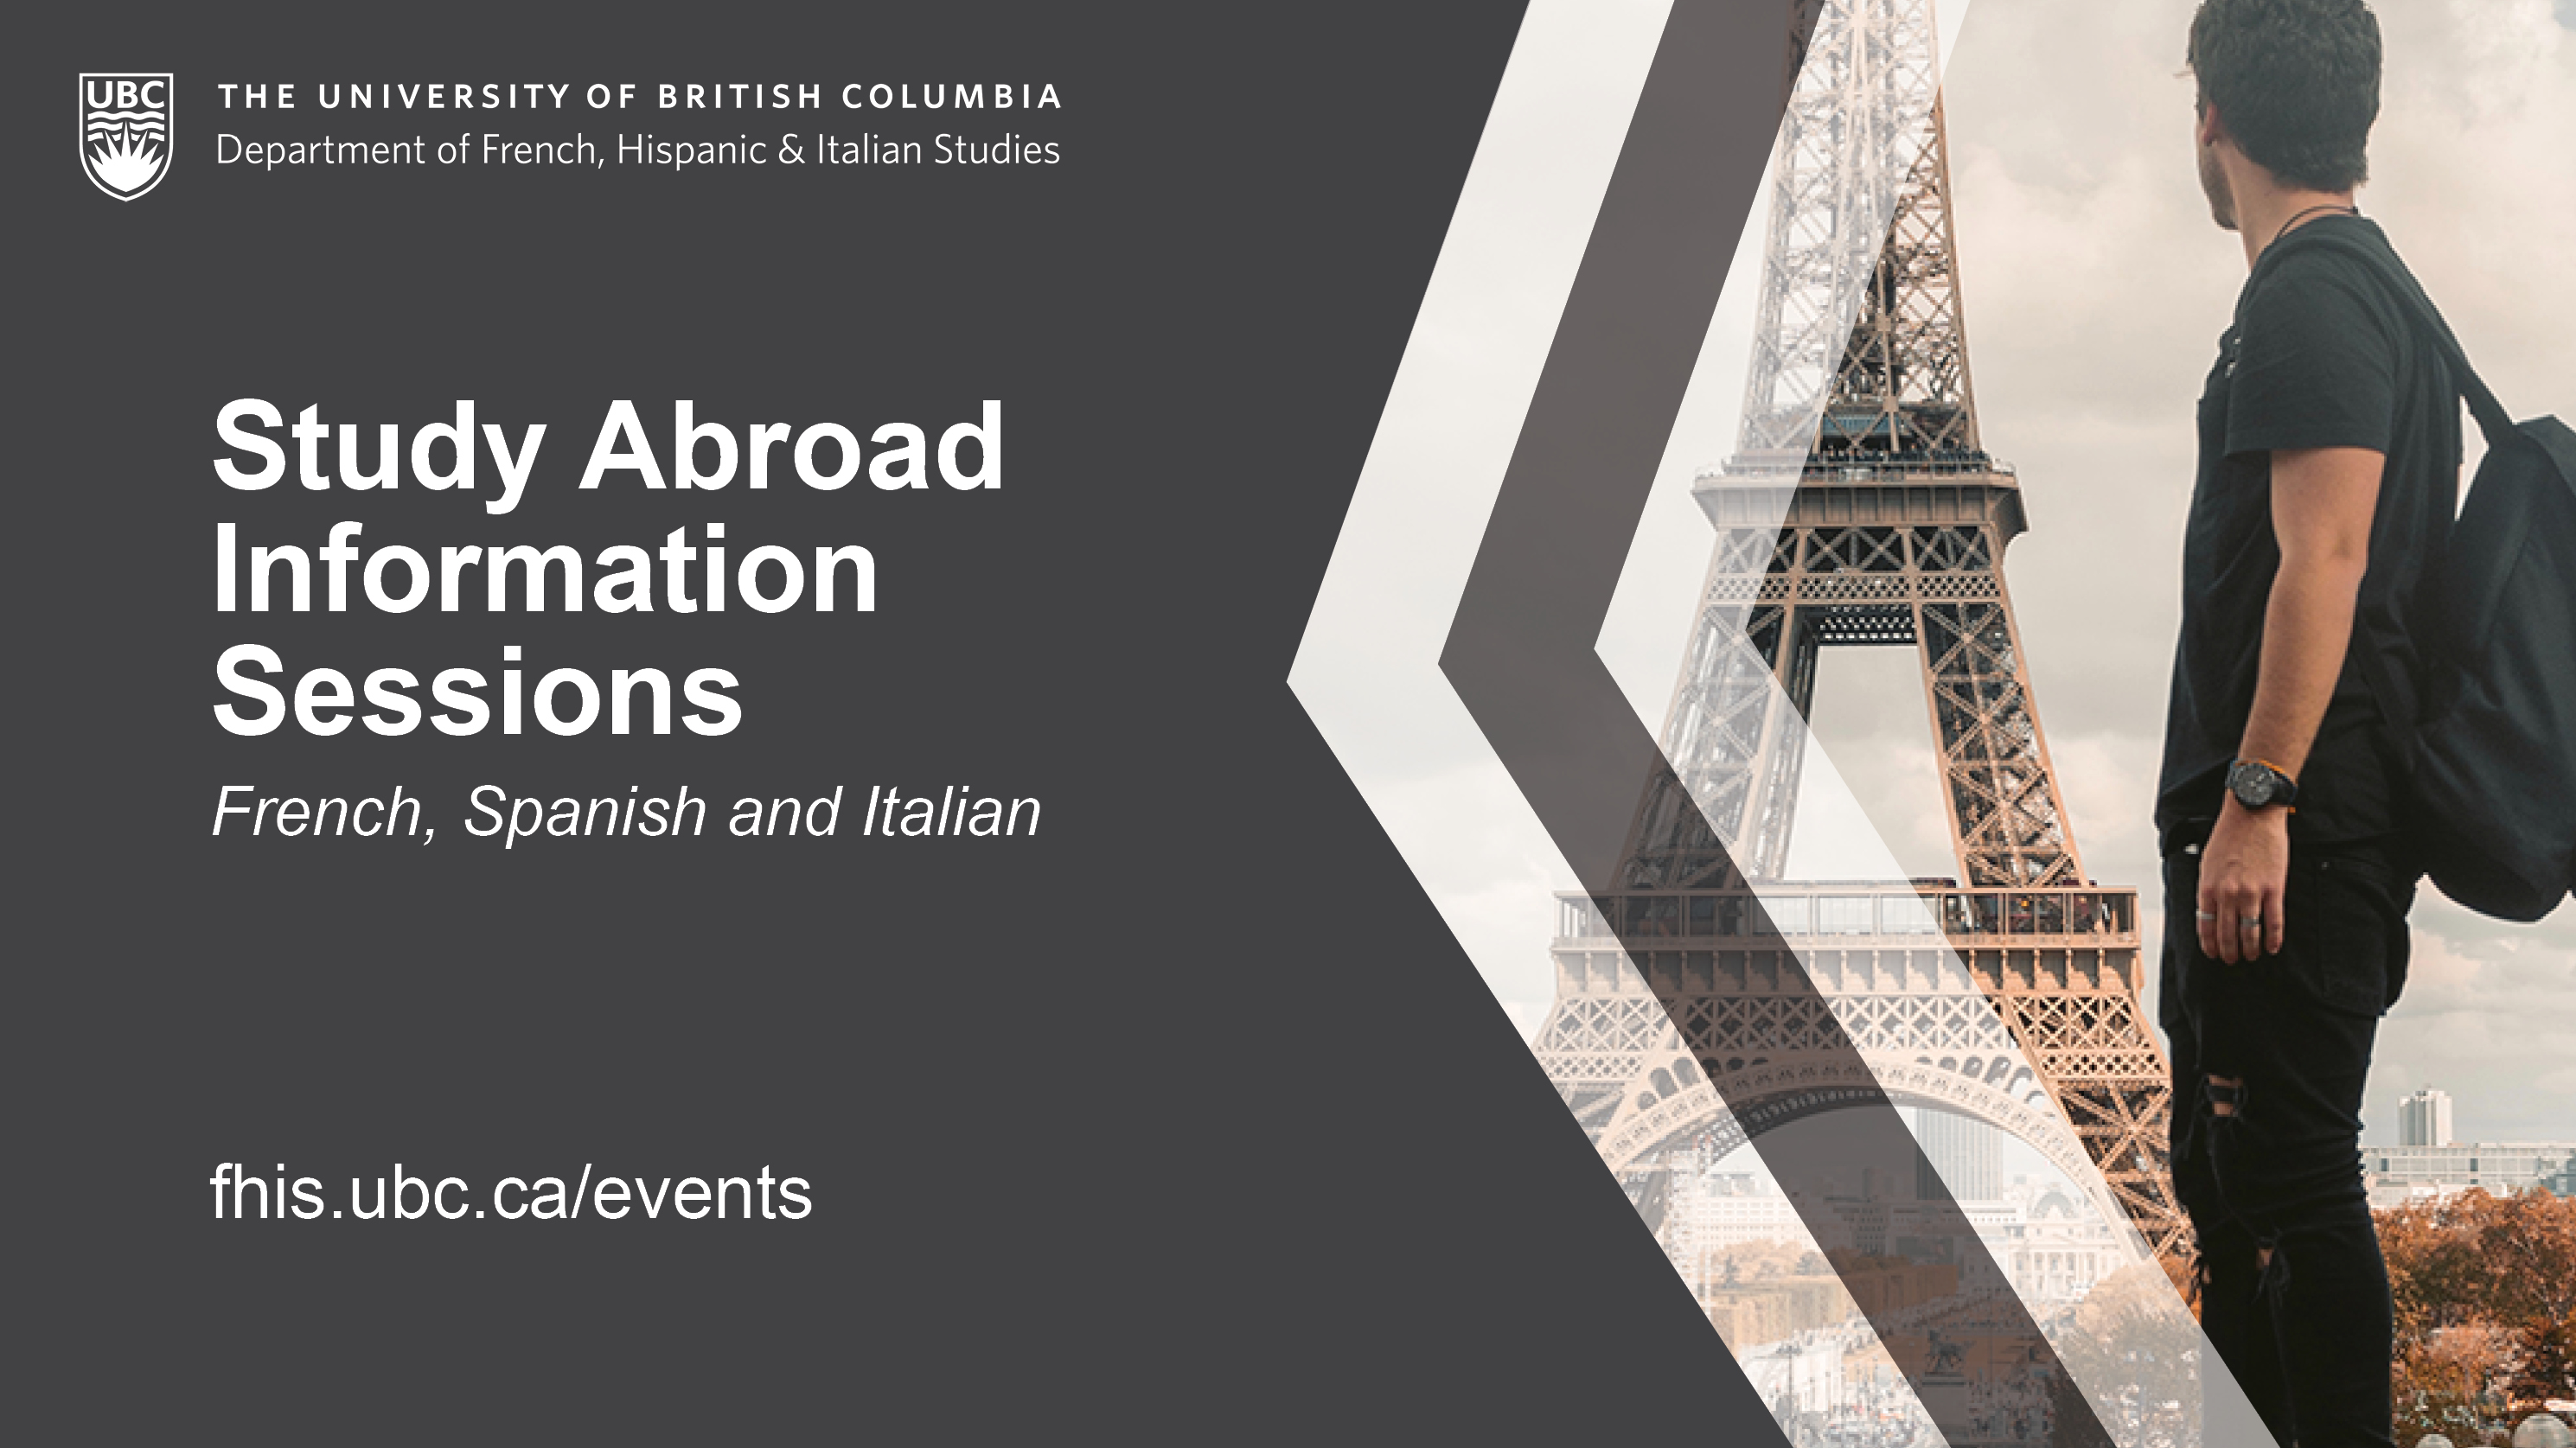 Study Abroad Information Session